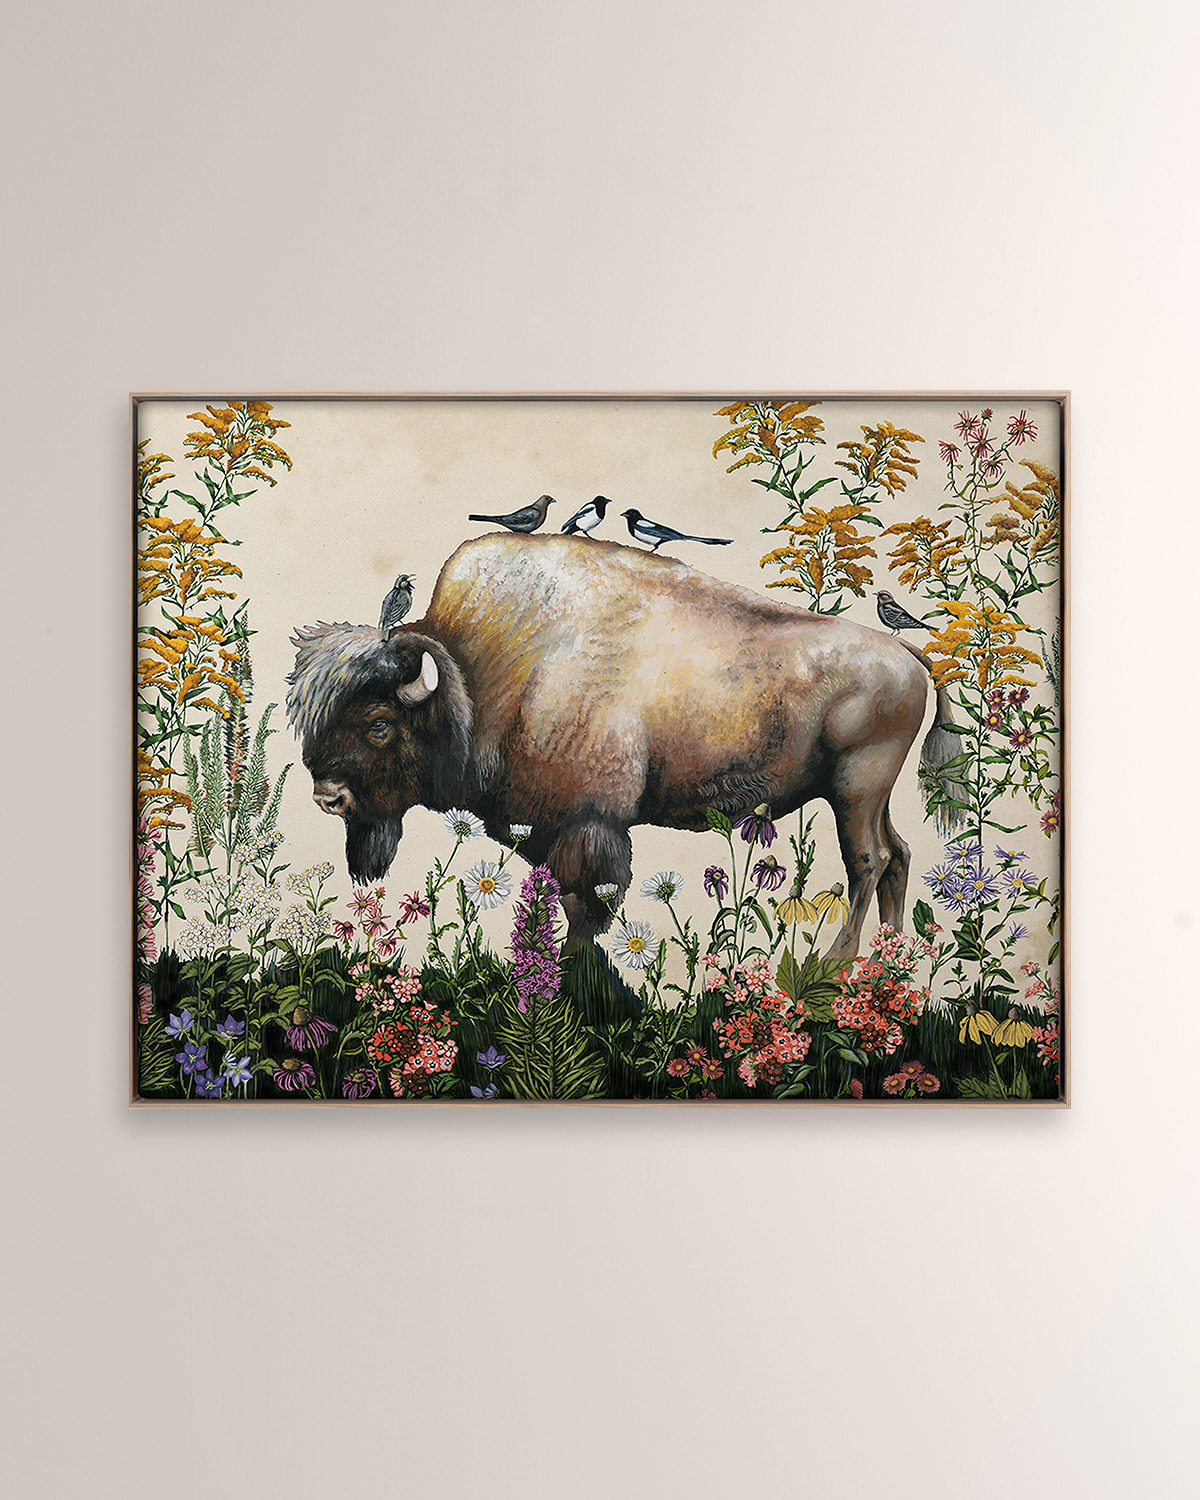 Bison Painting 2 Digital Art Print on Canvas by Thicket Design